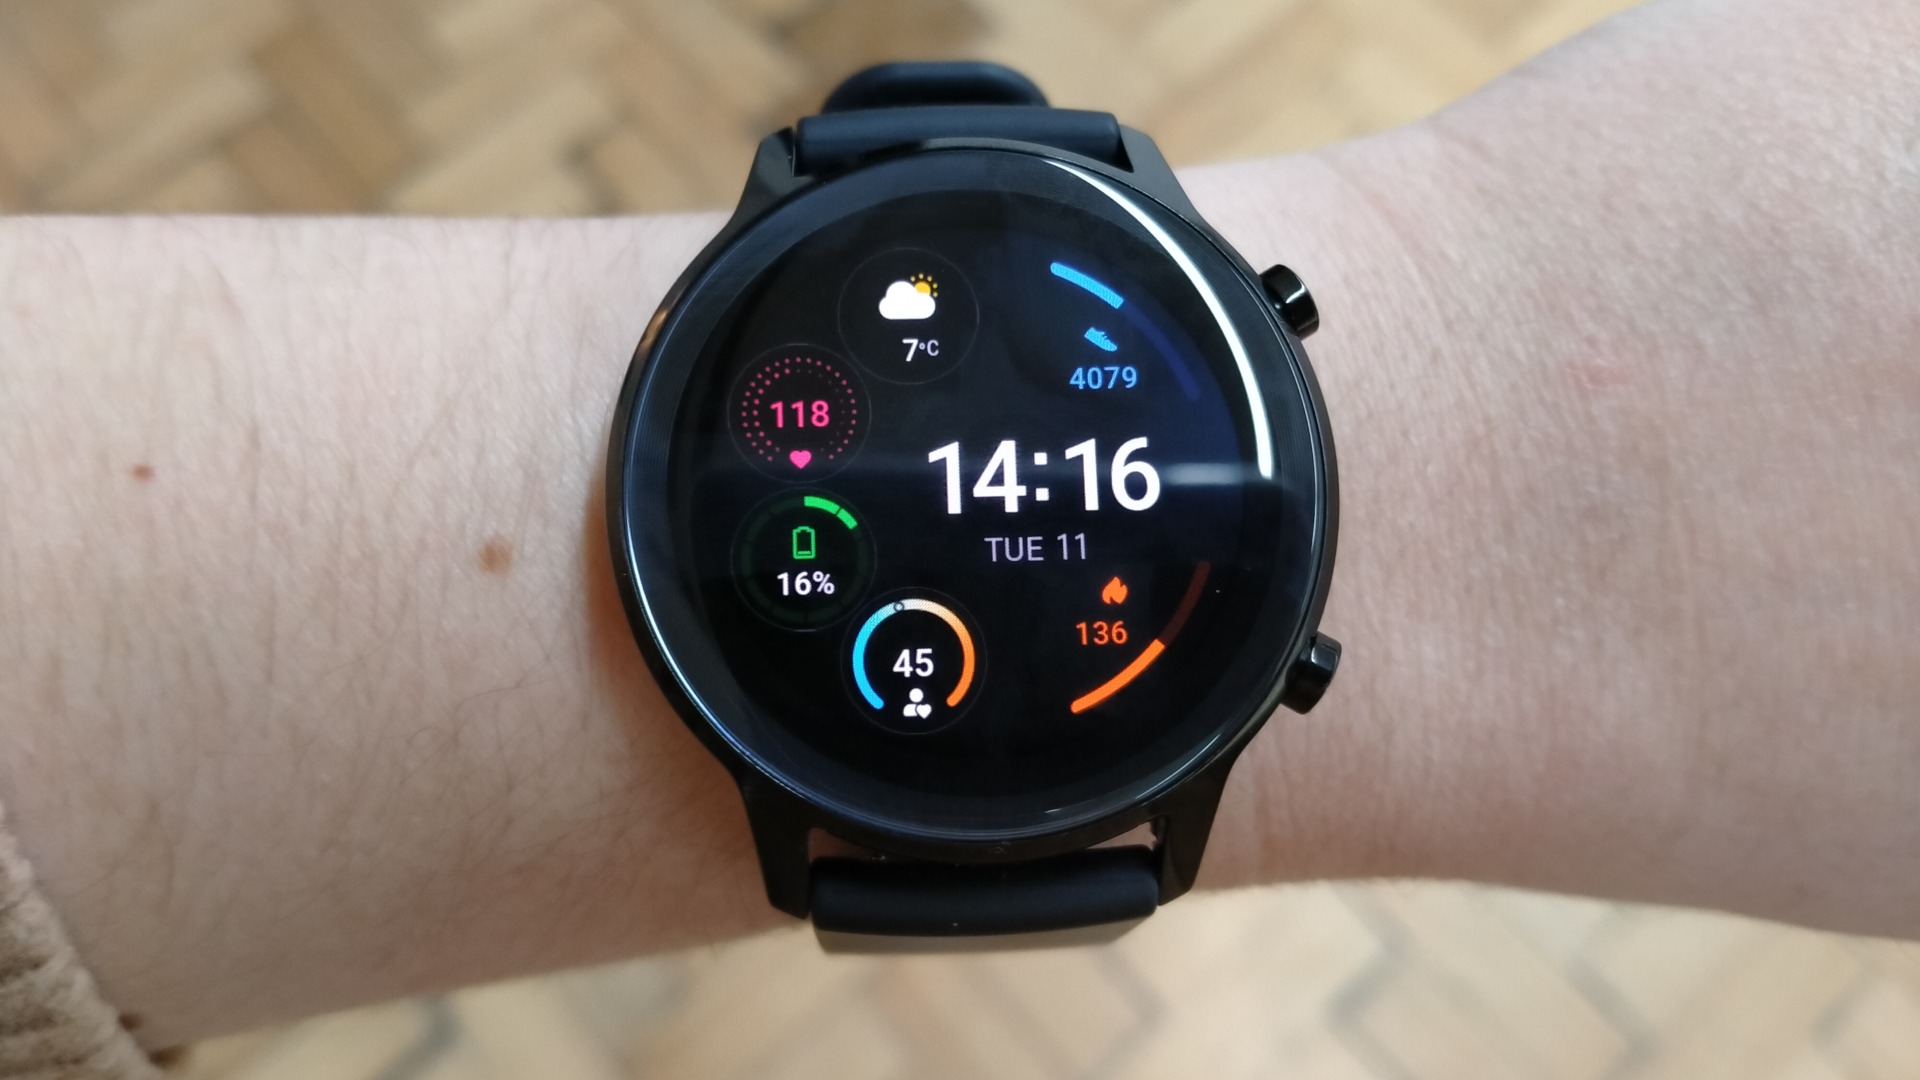 Honor Magic Watch 2 review: An honorable mention - Tech Advisor